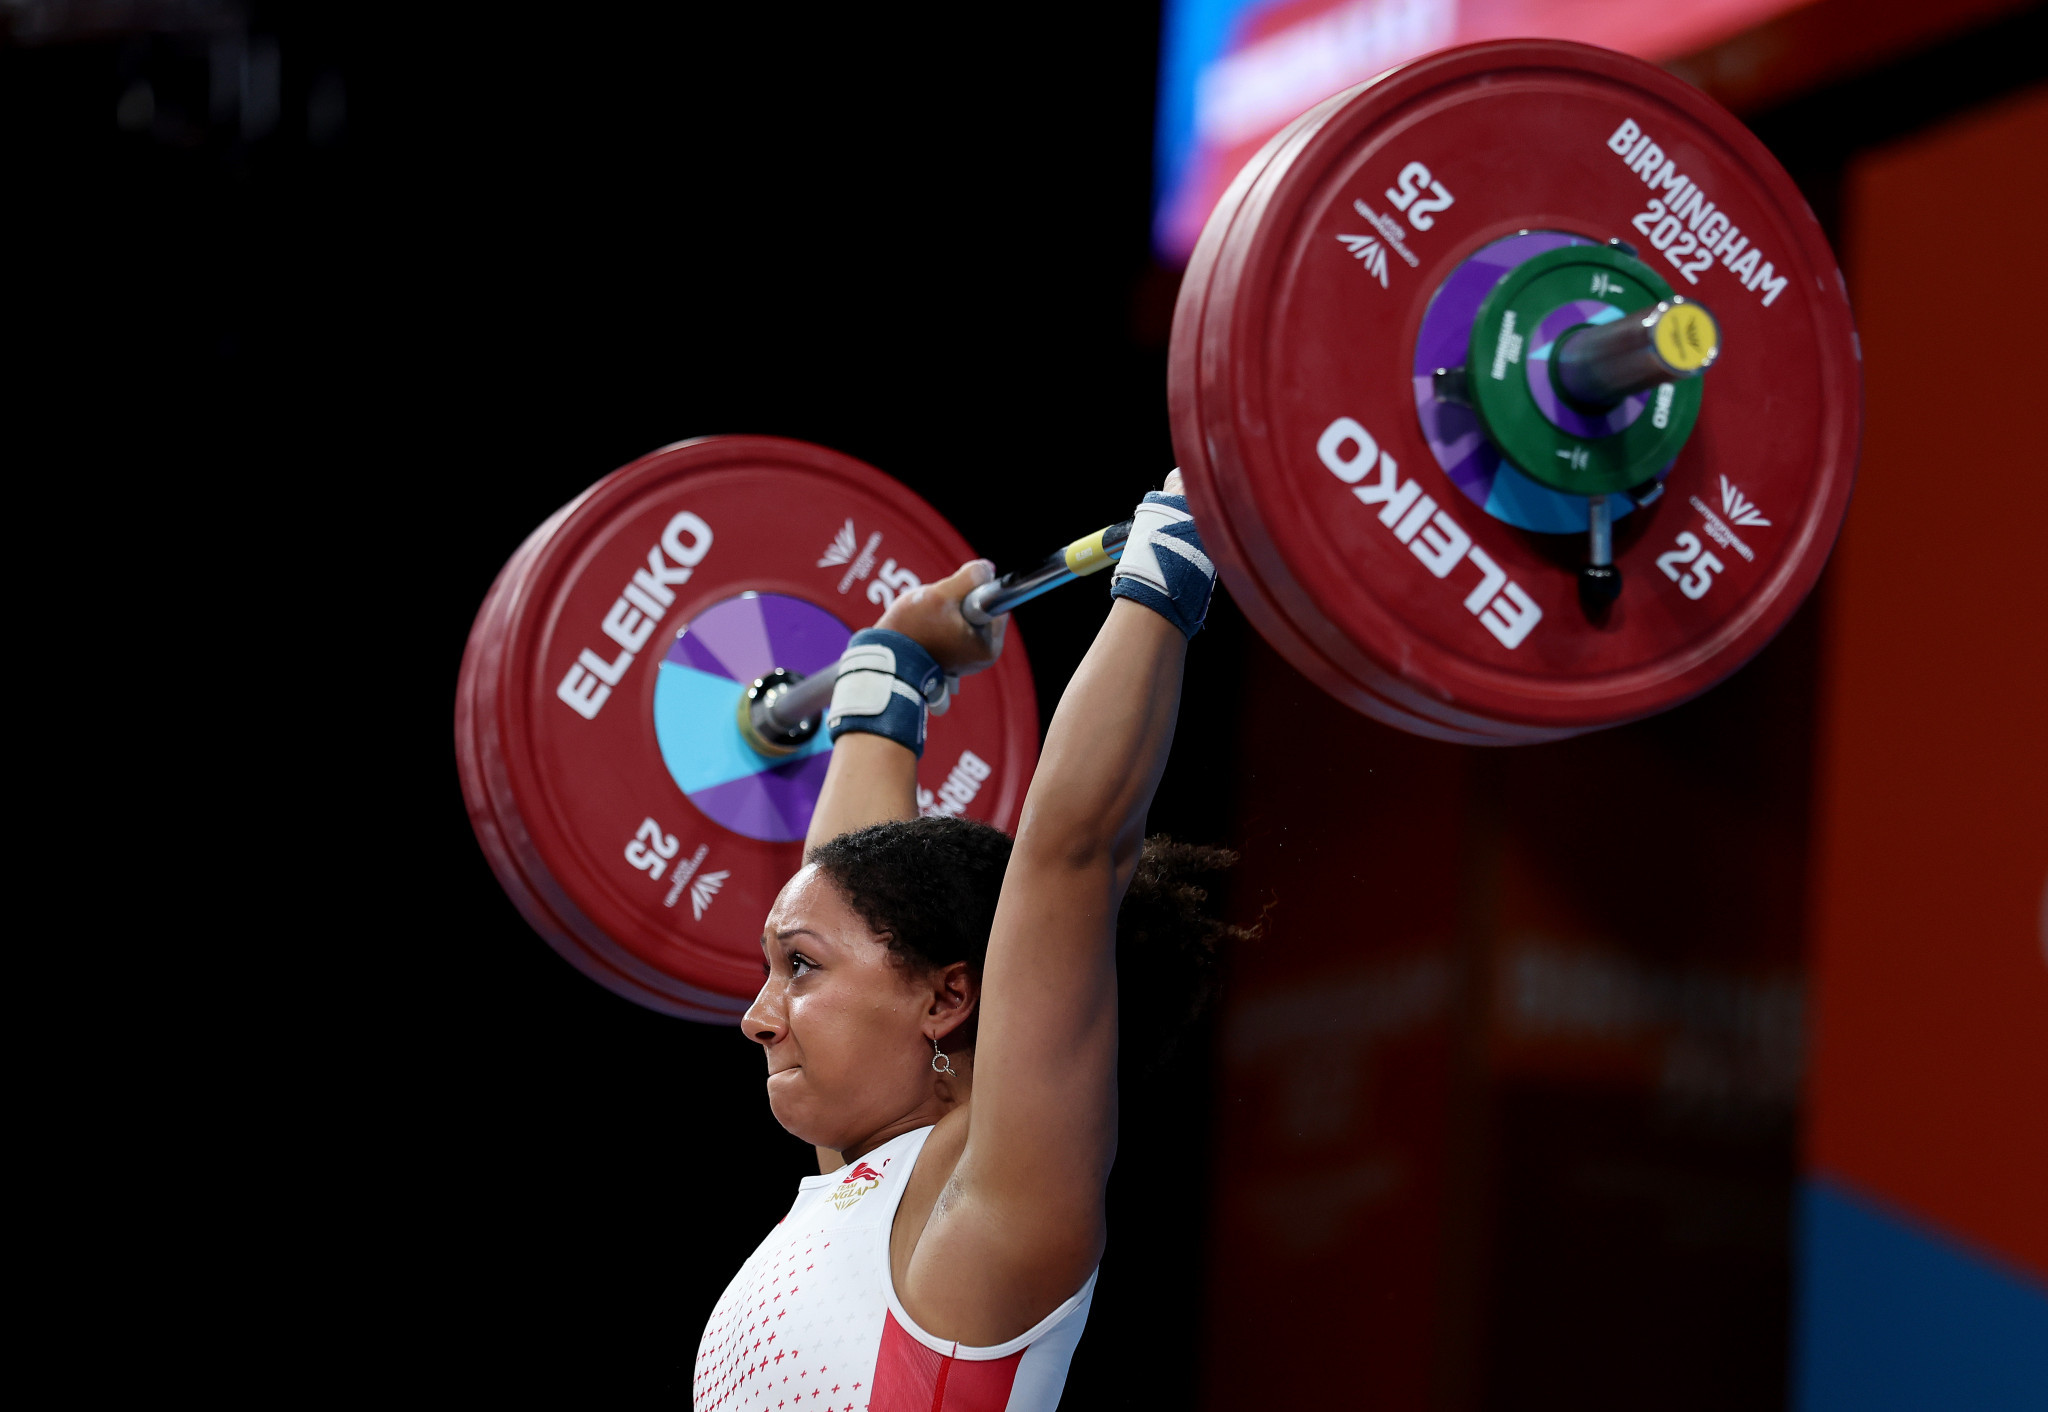 Athletes happy as IWF removes "undergarments" from weightlifting weigh-in rules